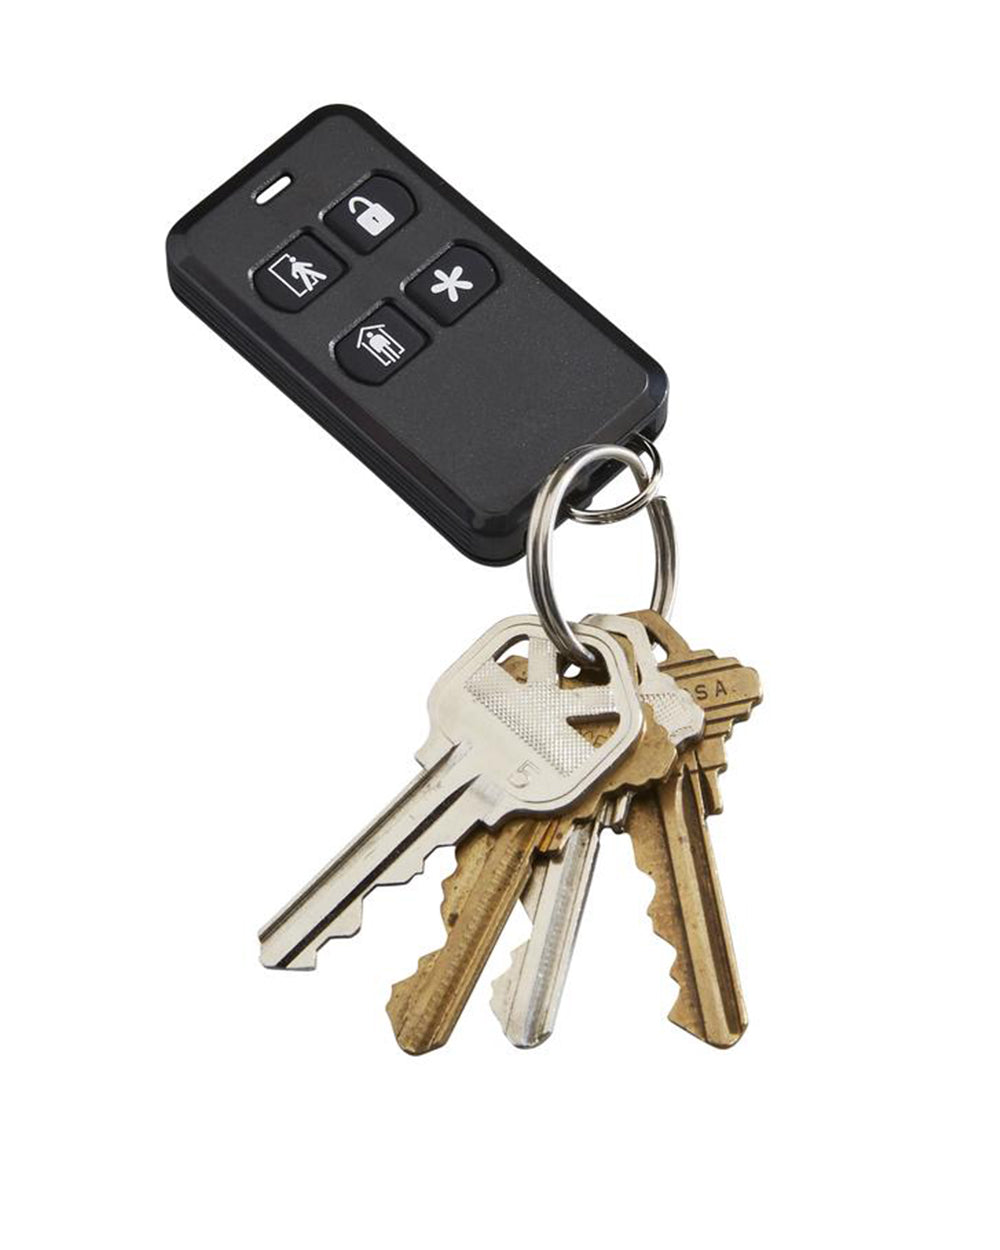 Key Fob Security System with Alarm